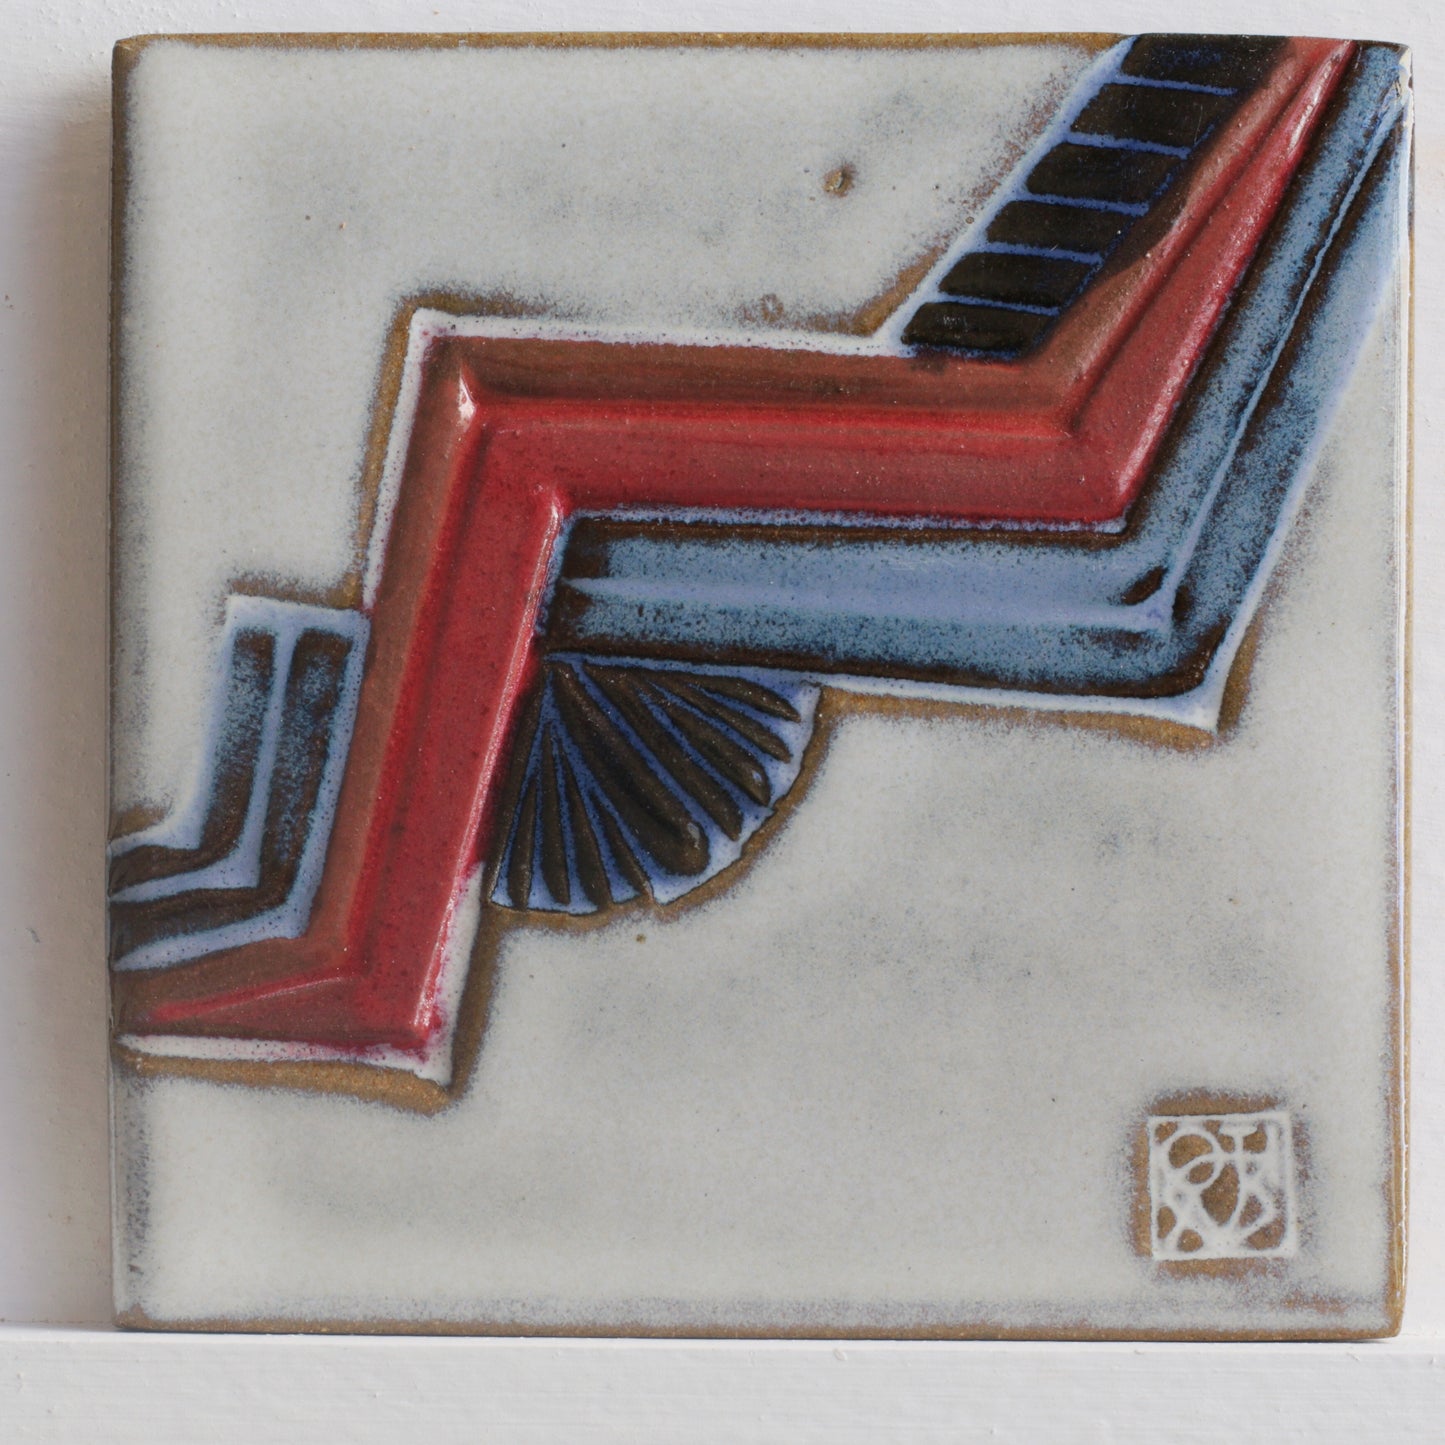 747- Coaster Set of (4) Small Square Tiles